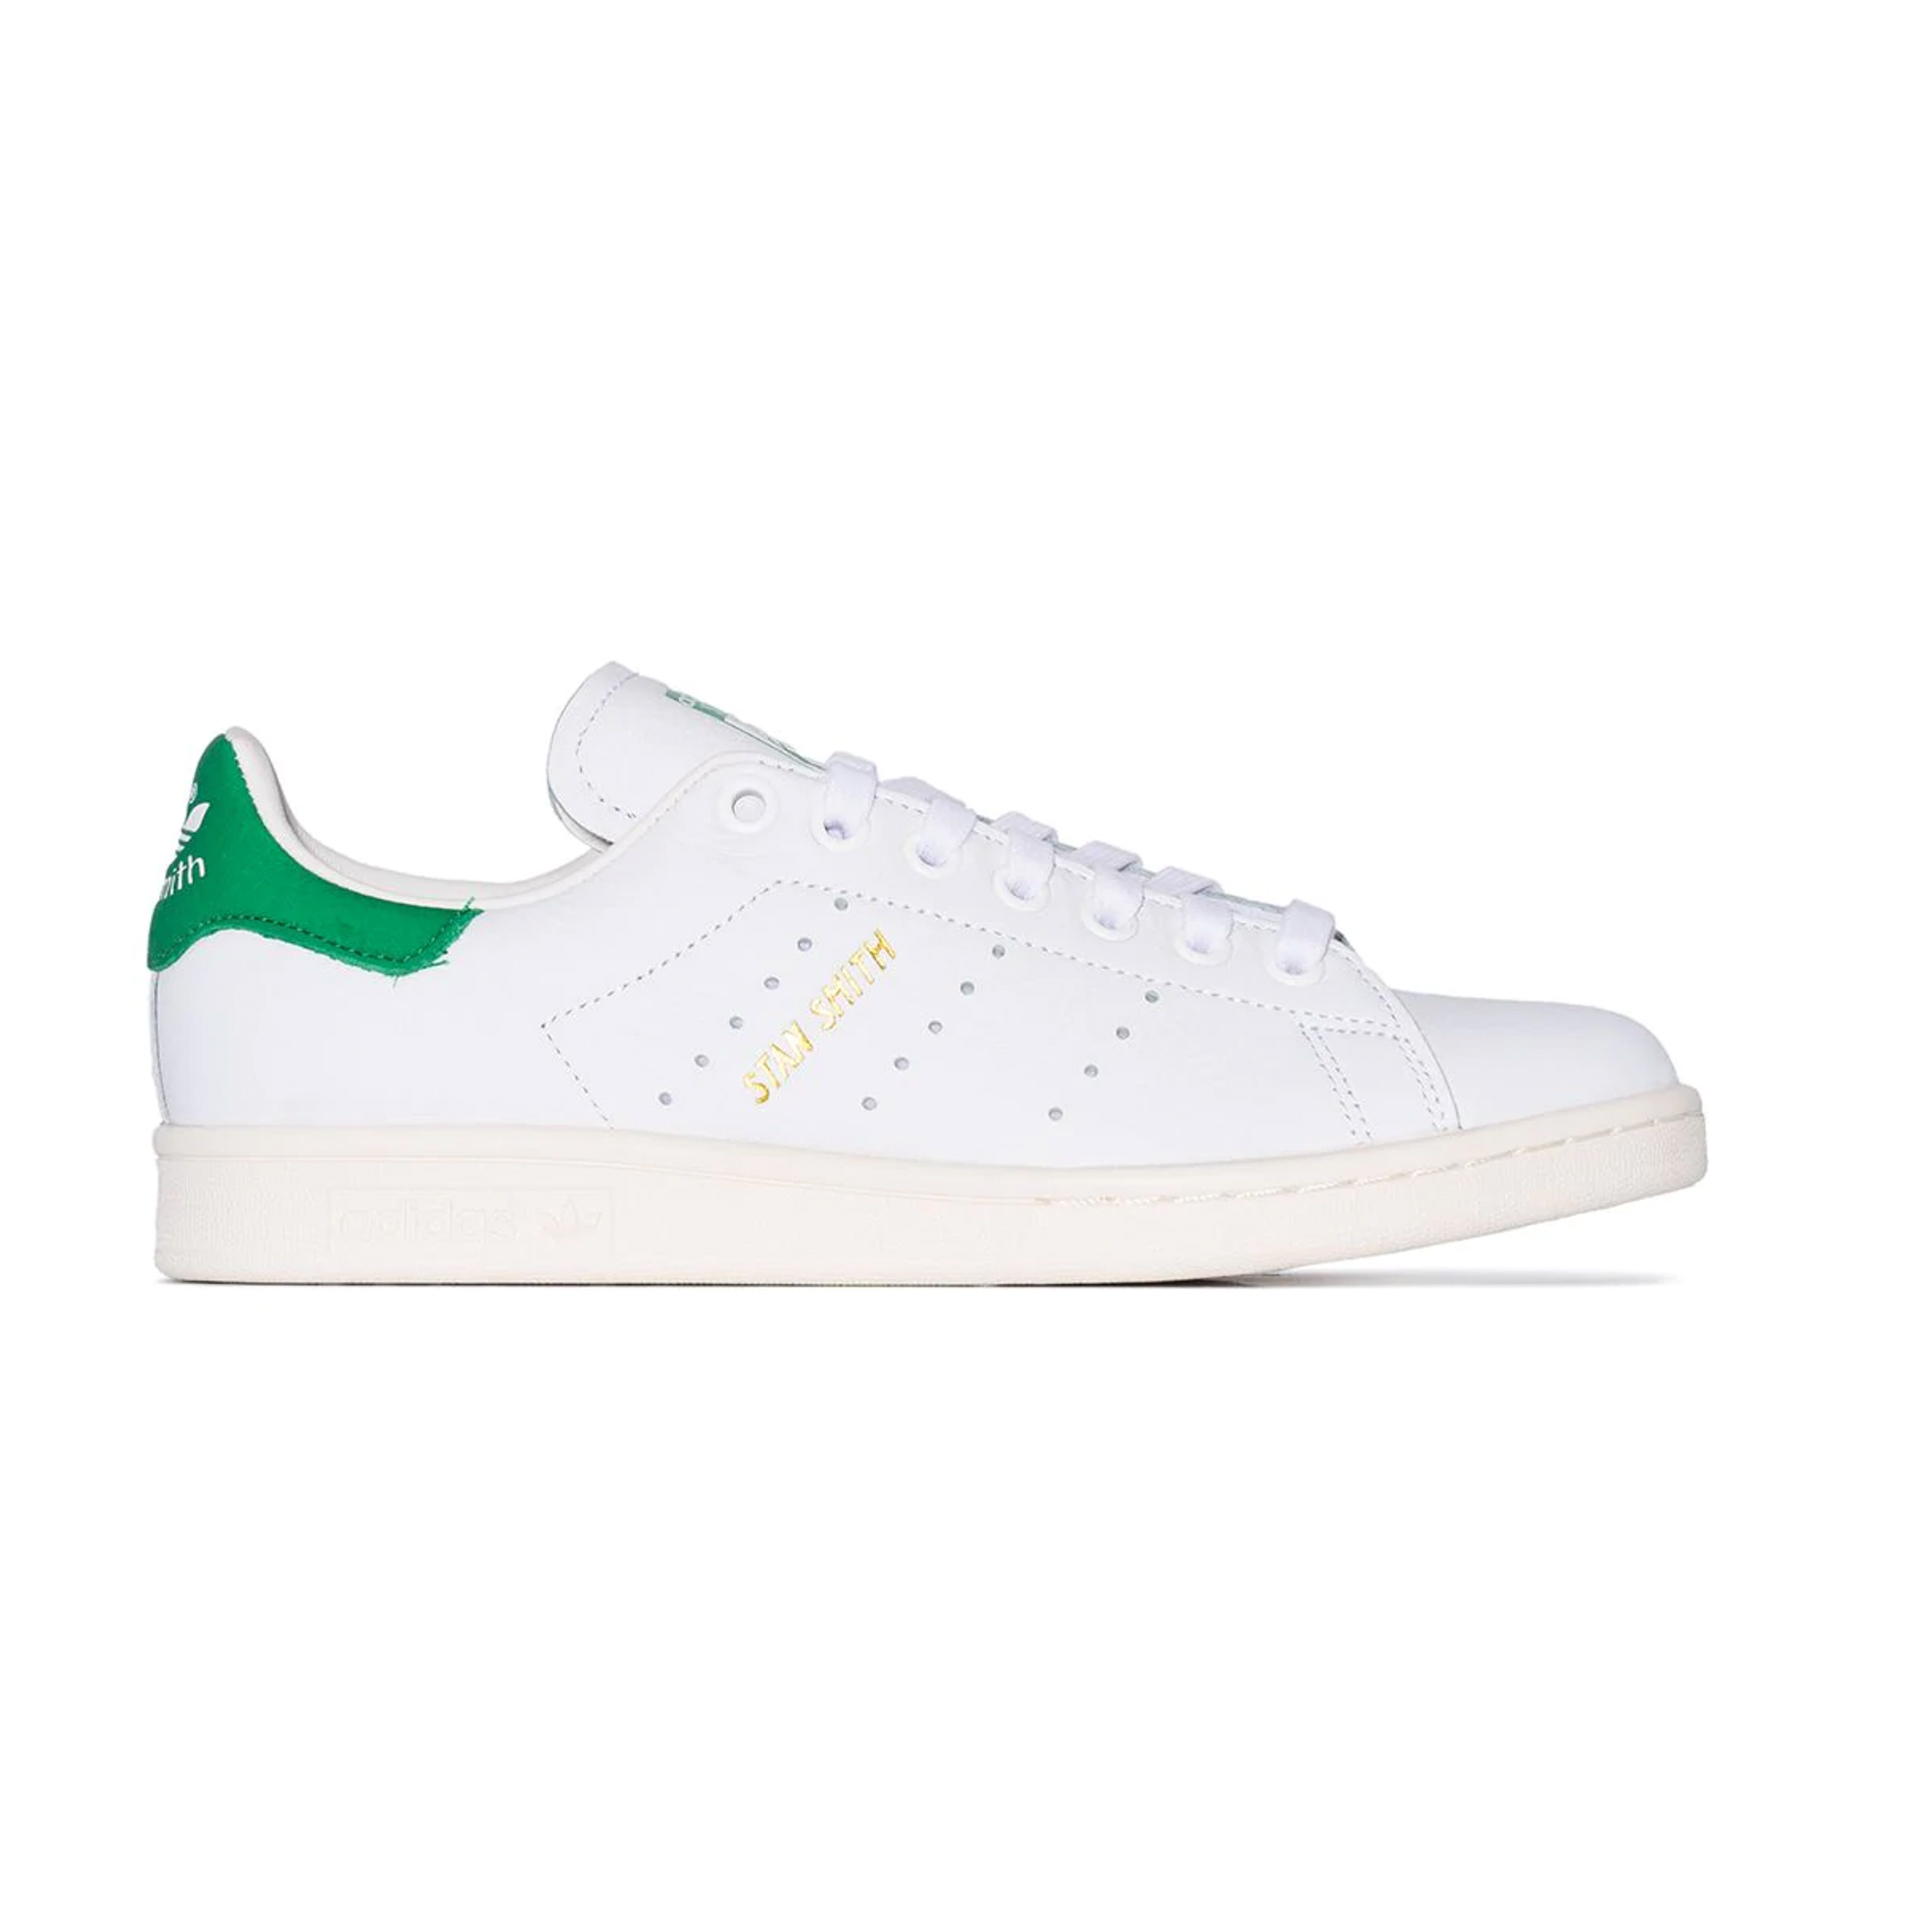 Adidas Stan Smith low-top Sneakers in green